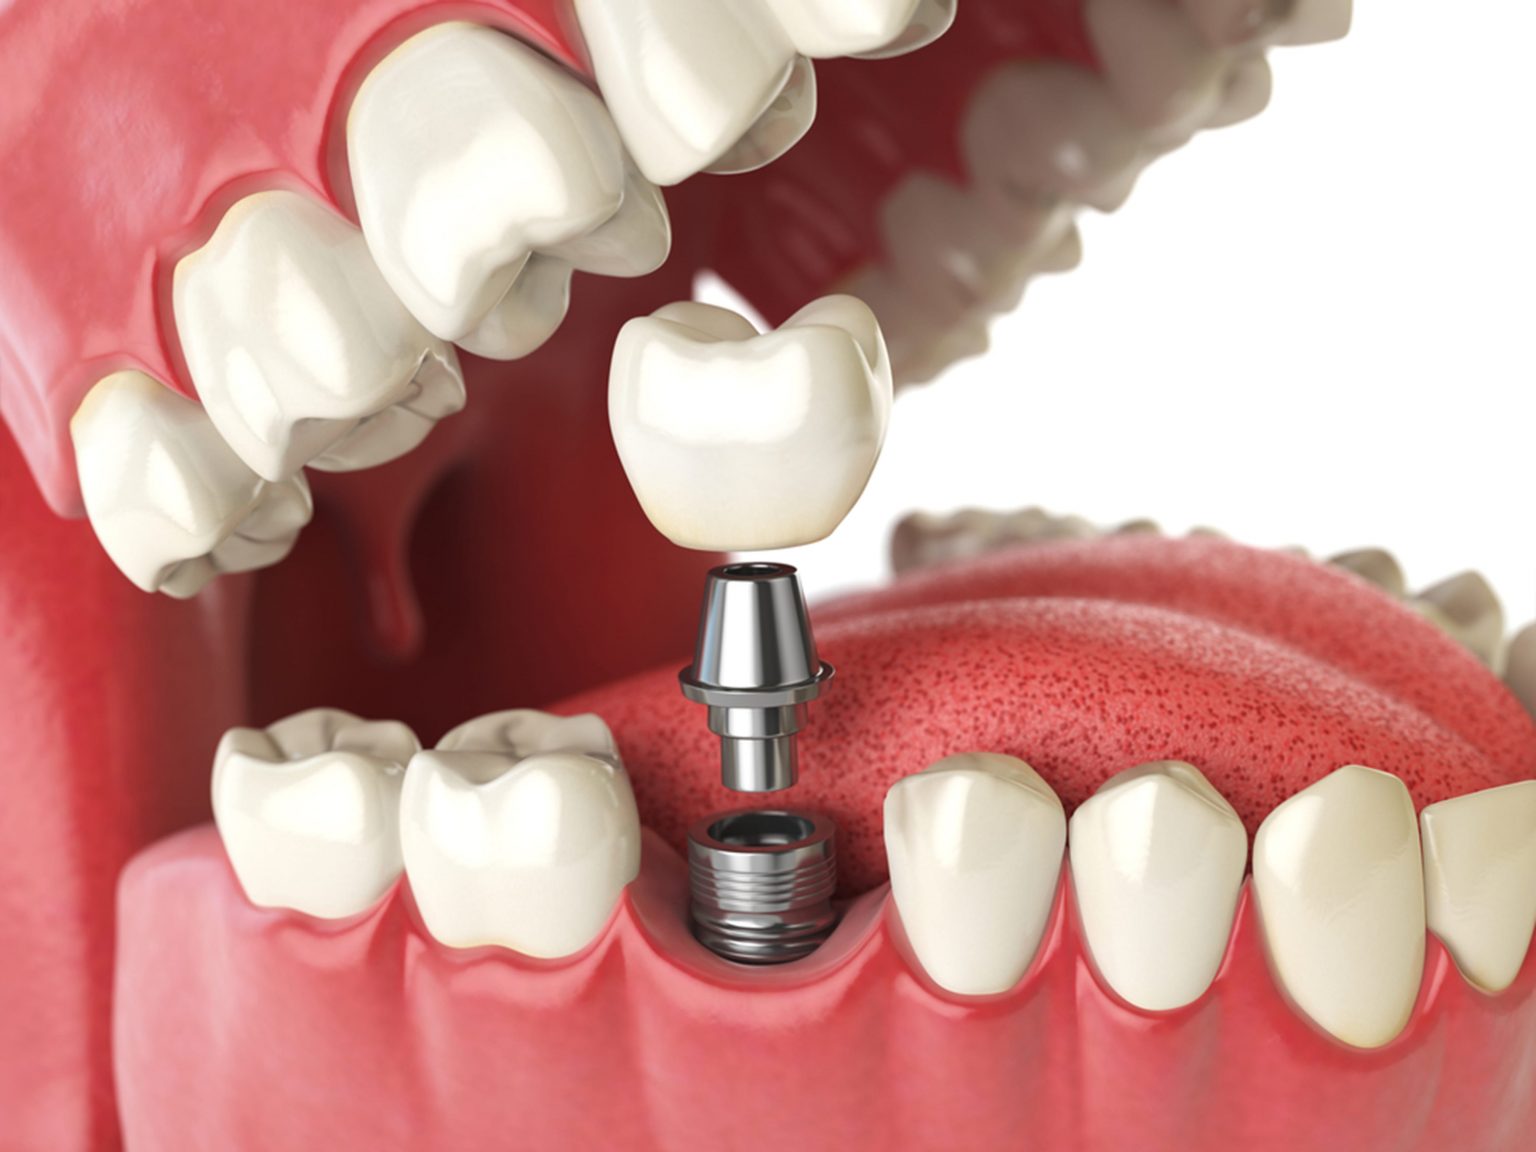 What Role Do Osseointegration Play in the Success of Dental Implants?